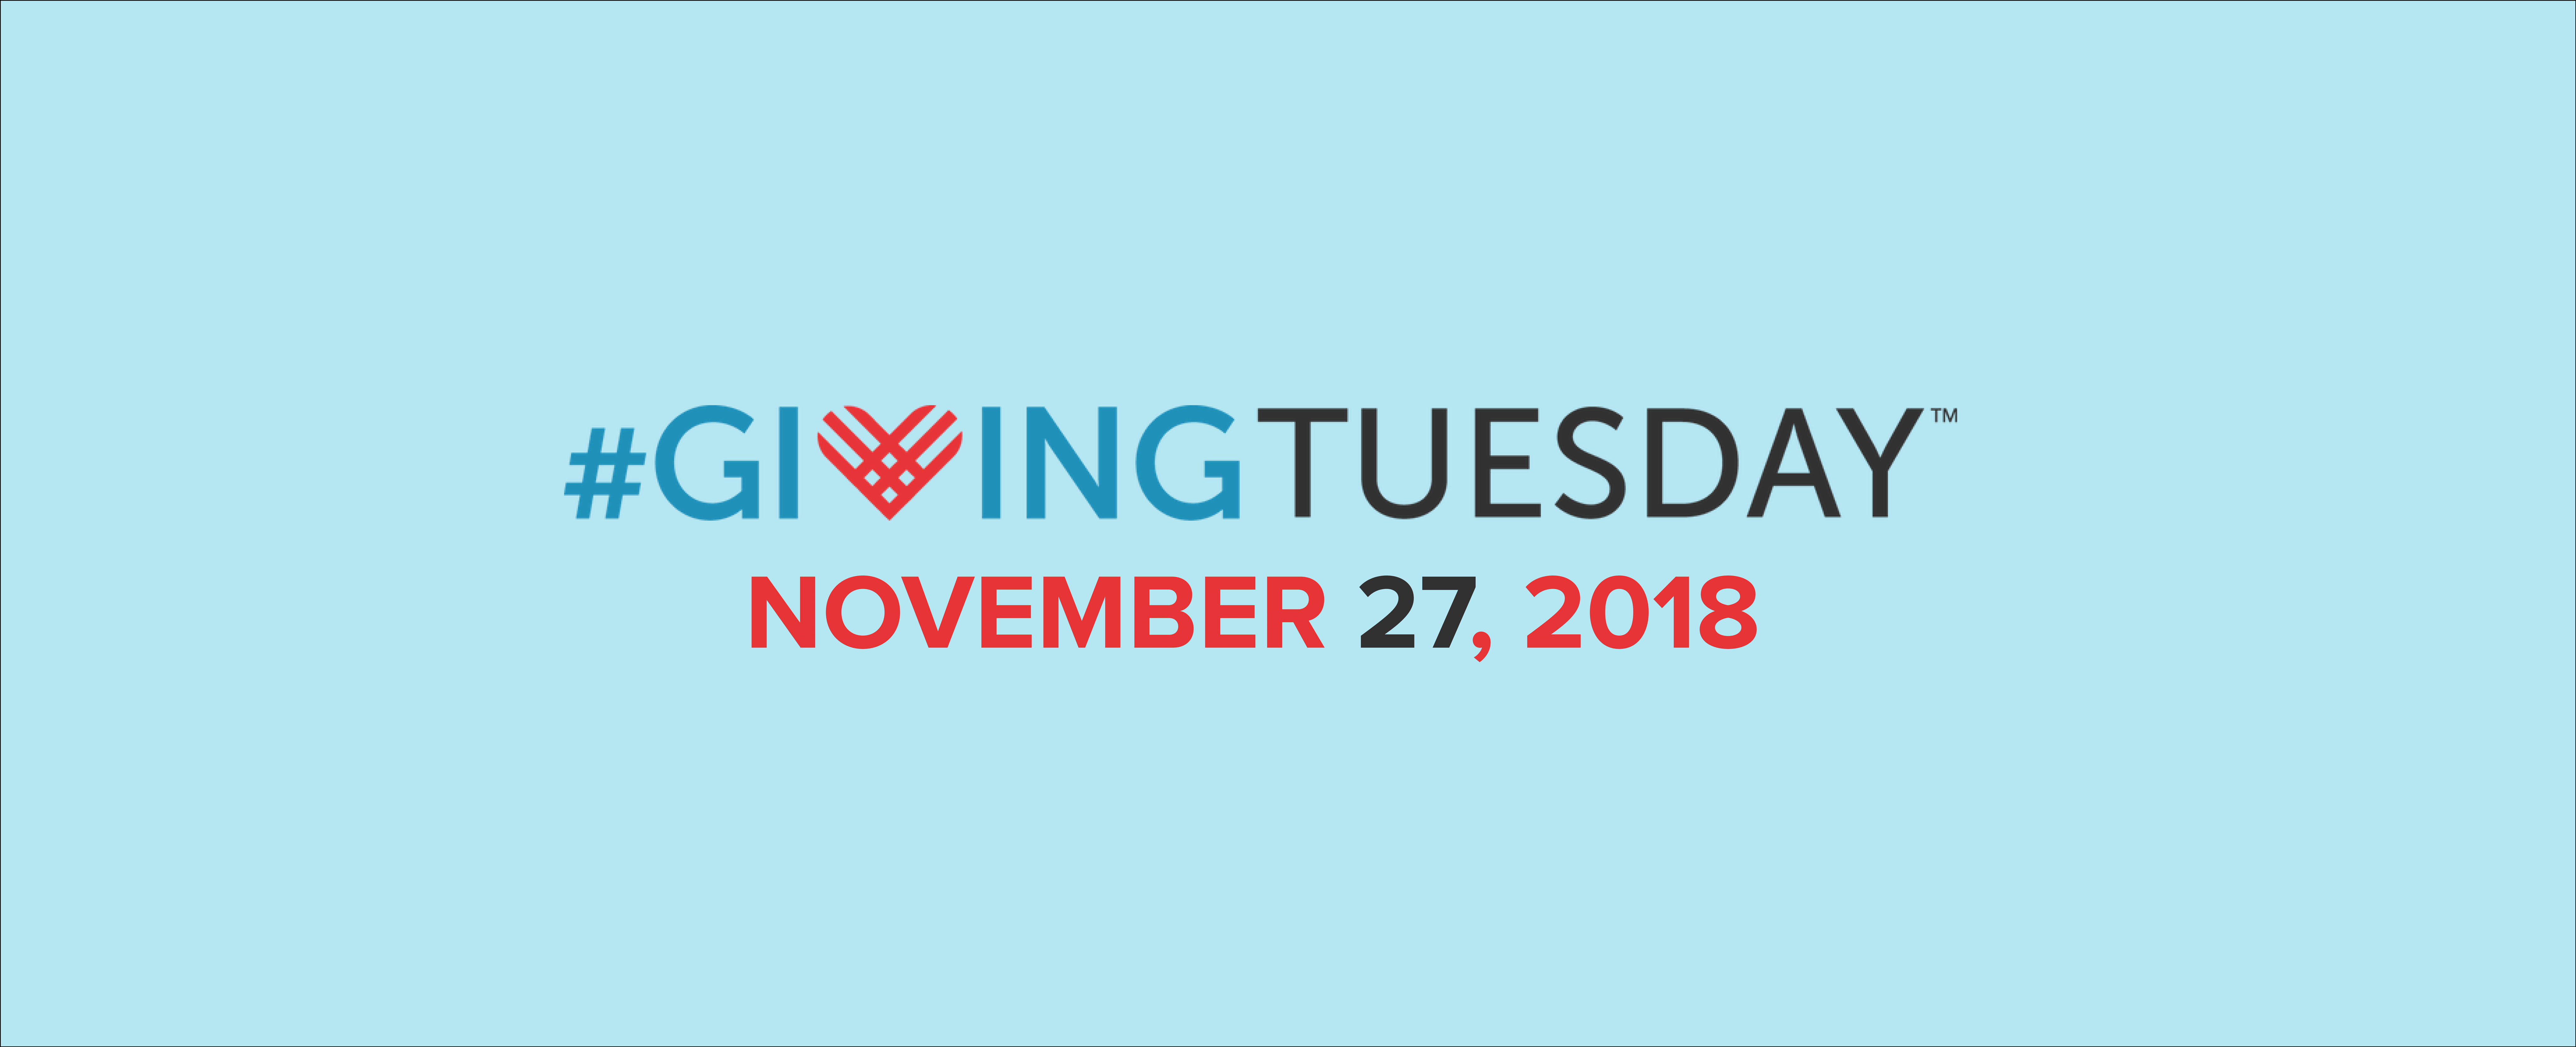 Giving Tuesday 2018: Predictions, Stats and Facts.